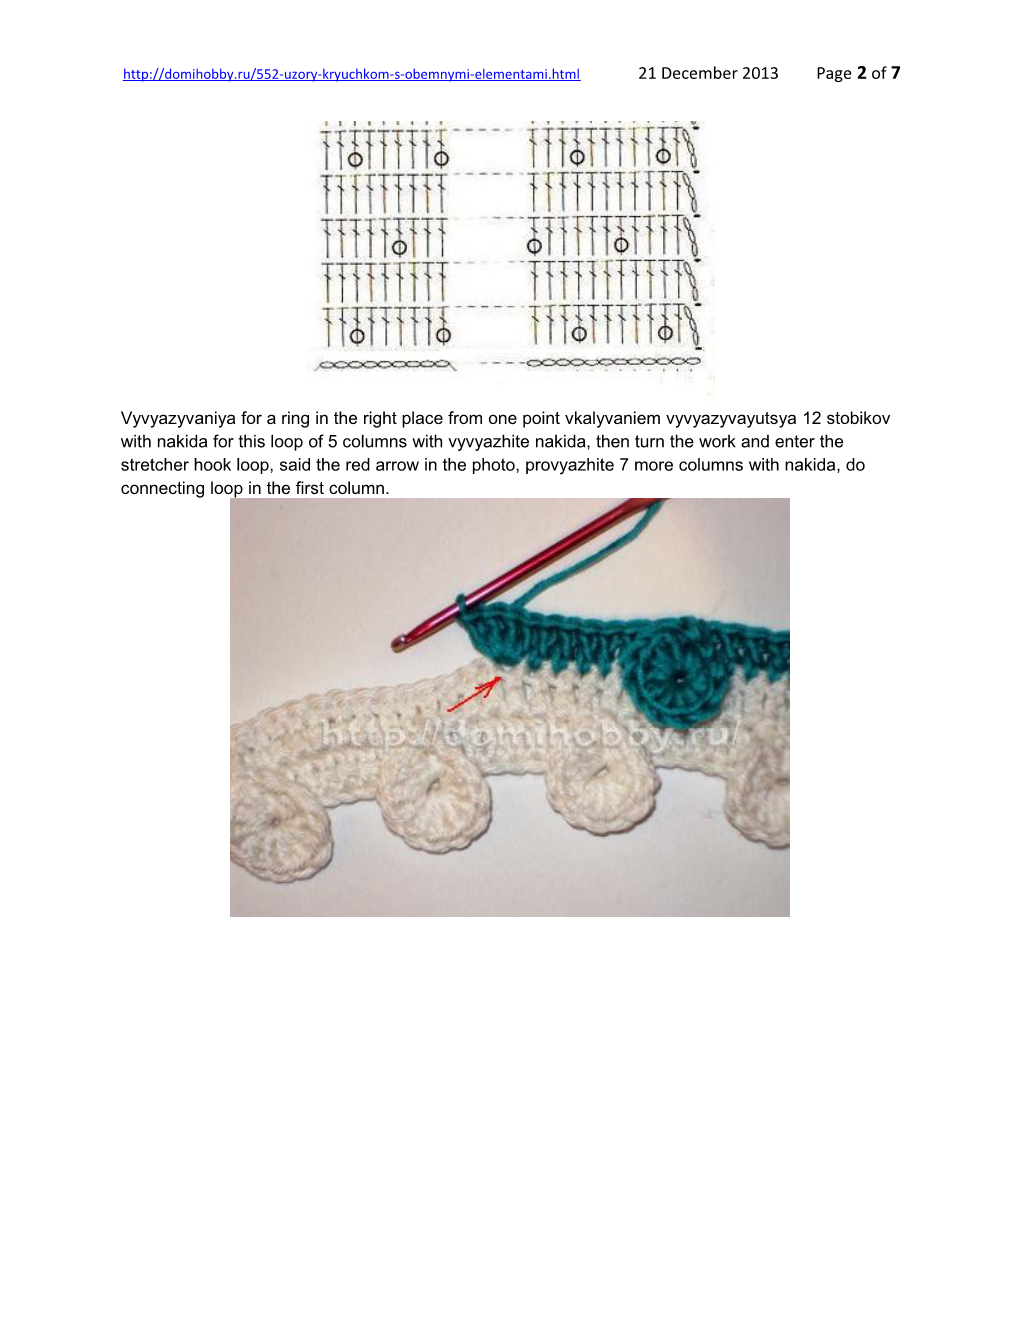 Crochet Patterns with Volume Elements